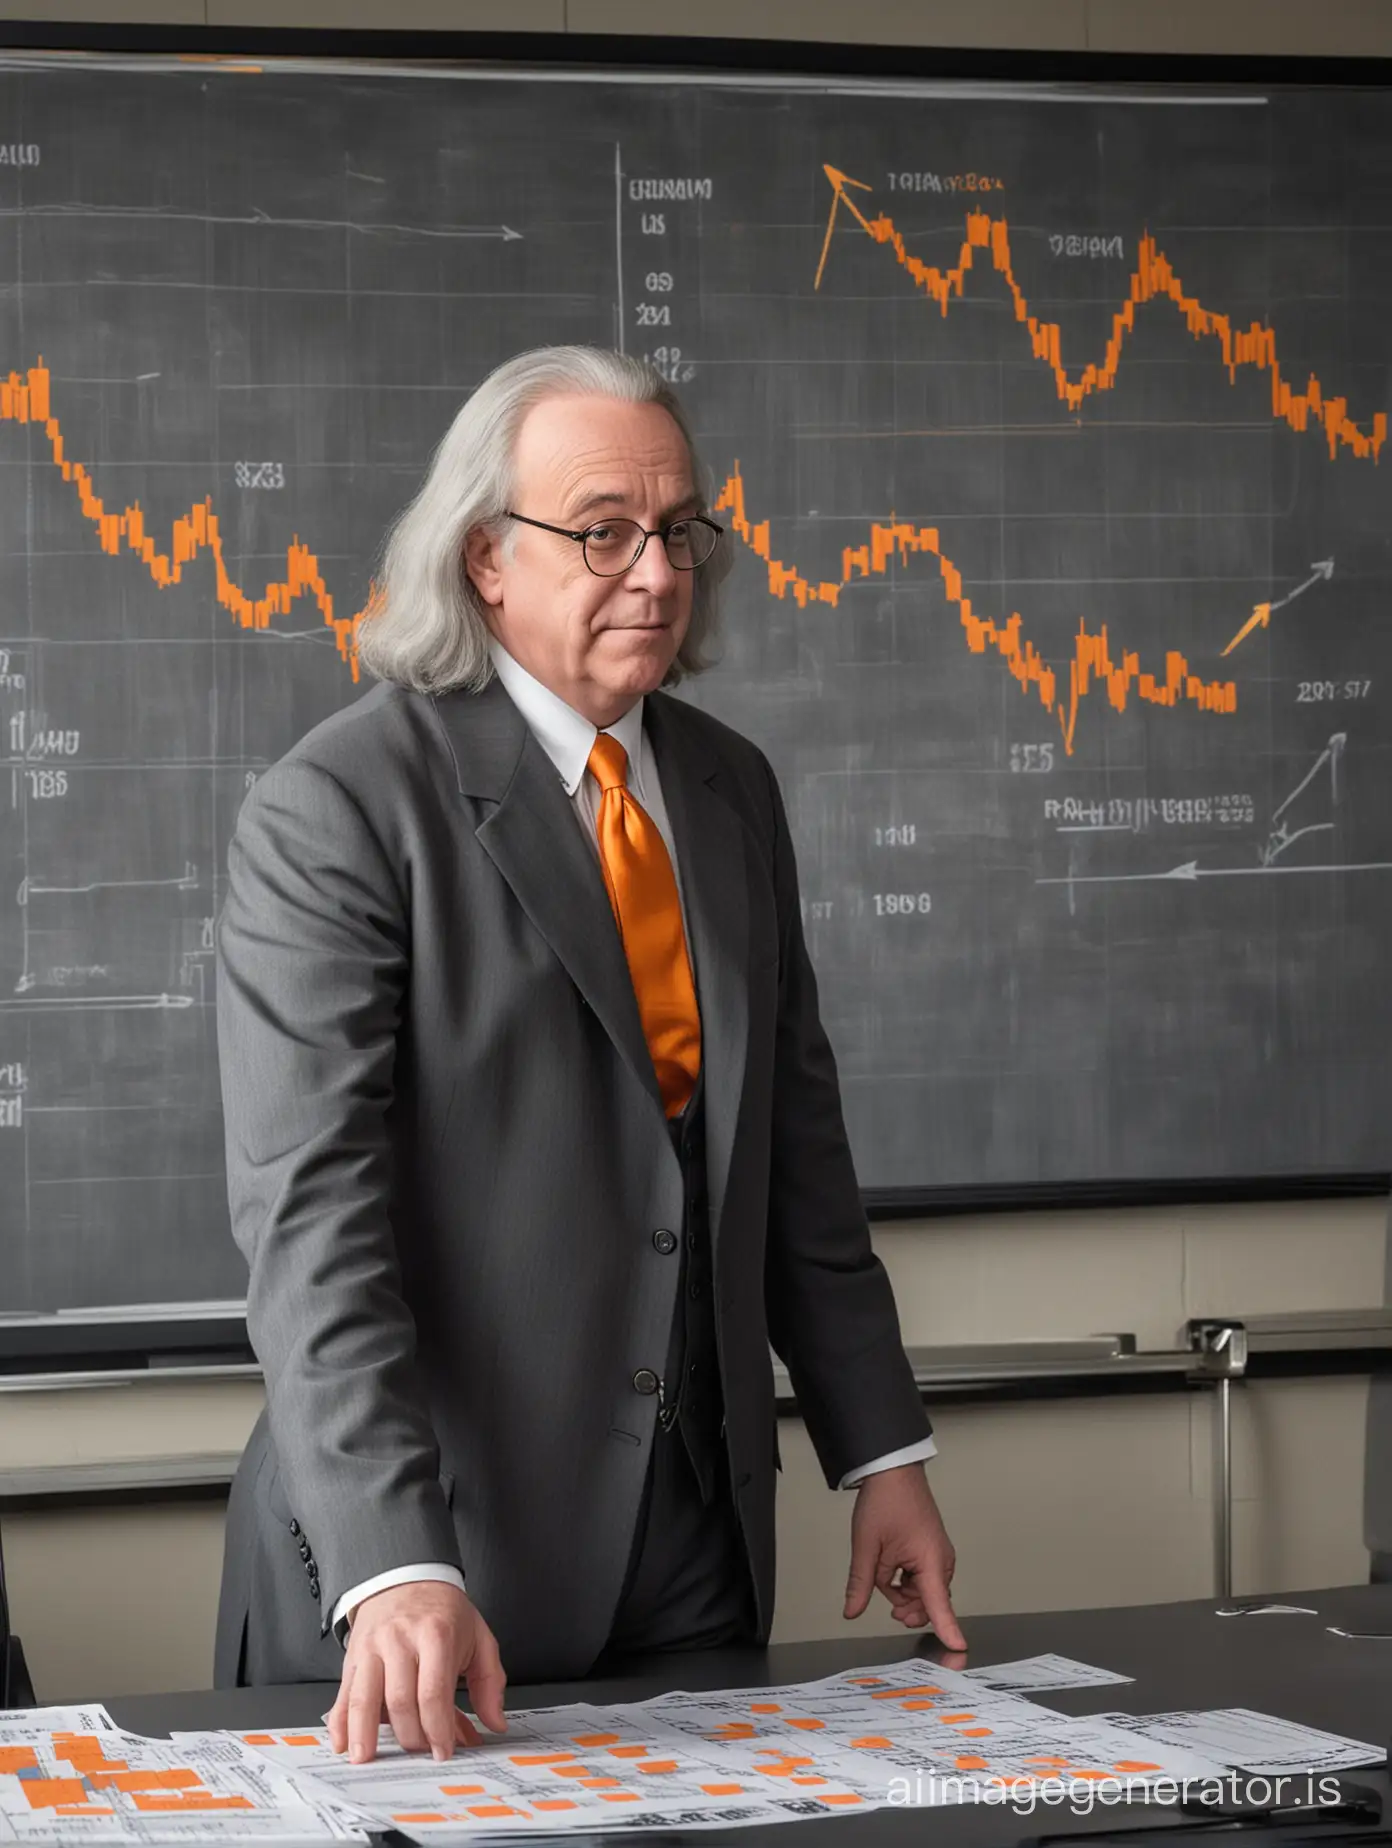 Ben Franklin, distant perspective, shoulder length gray hair, glasses, dark gray business suit, orange tie, modern conference room with other people, pointing to orange and gray chart graph with an arrow pointing up to money sign